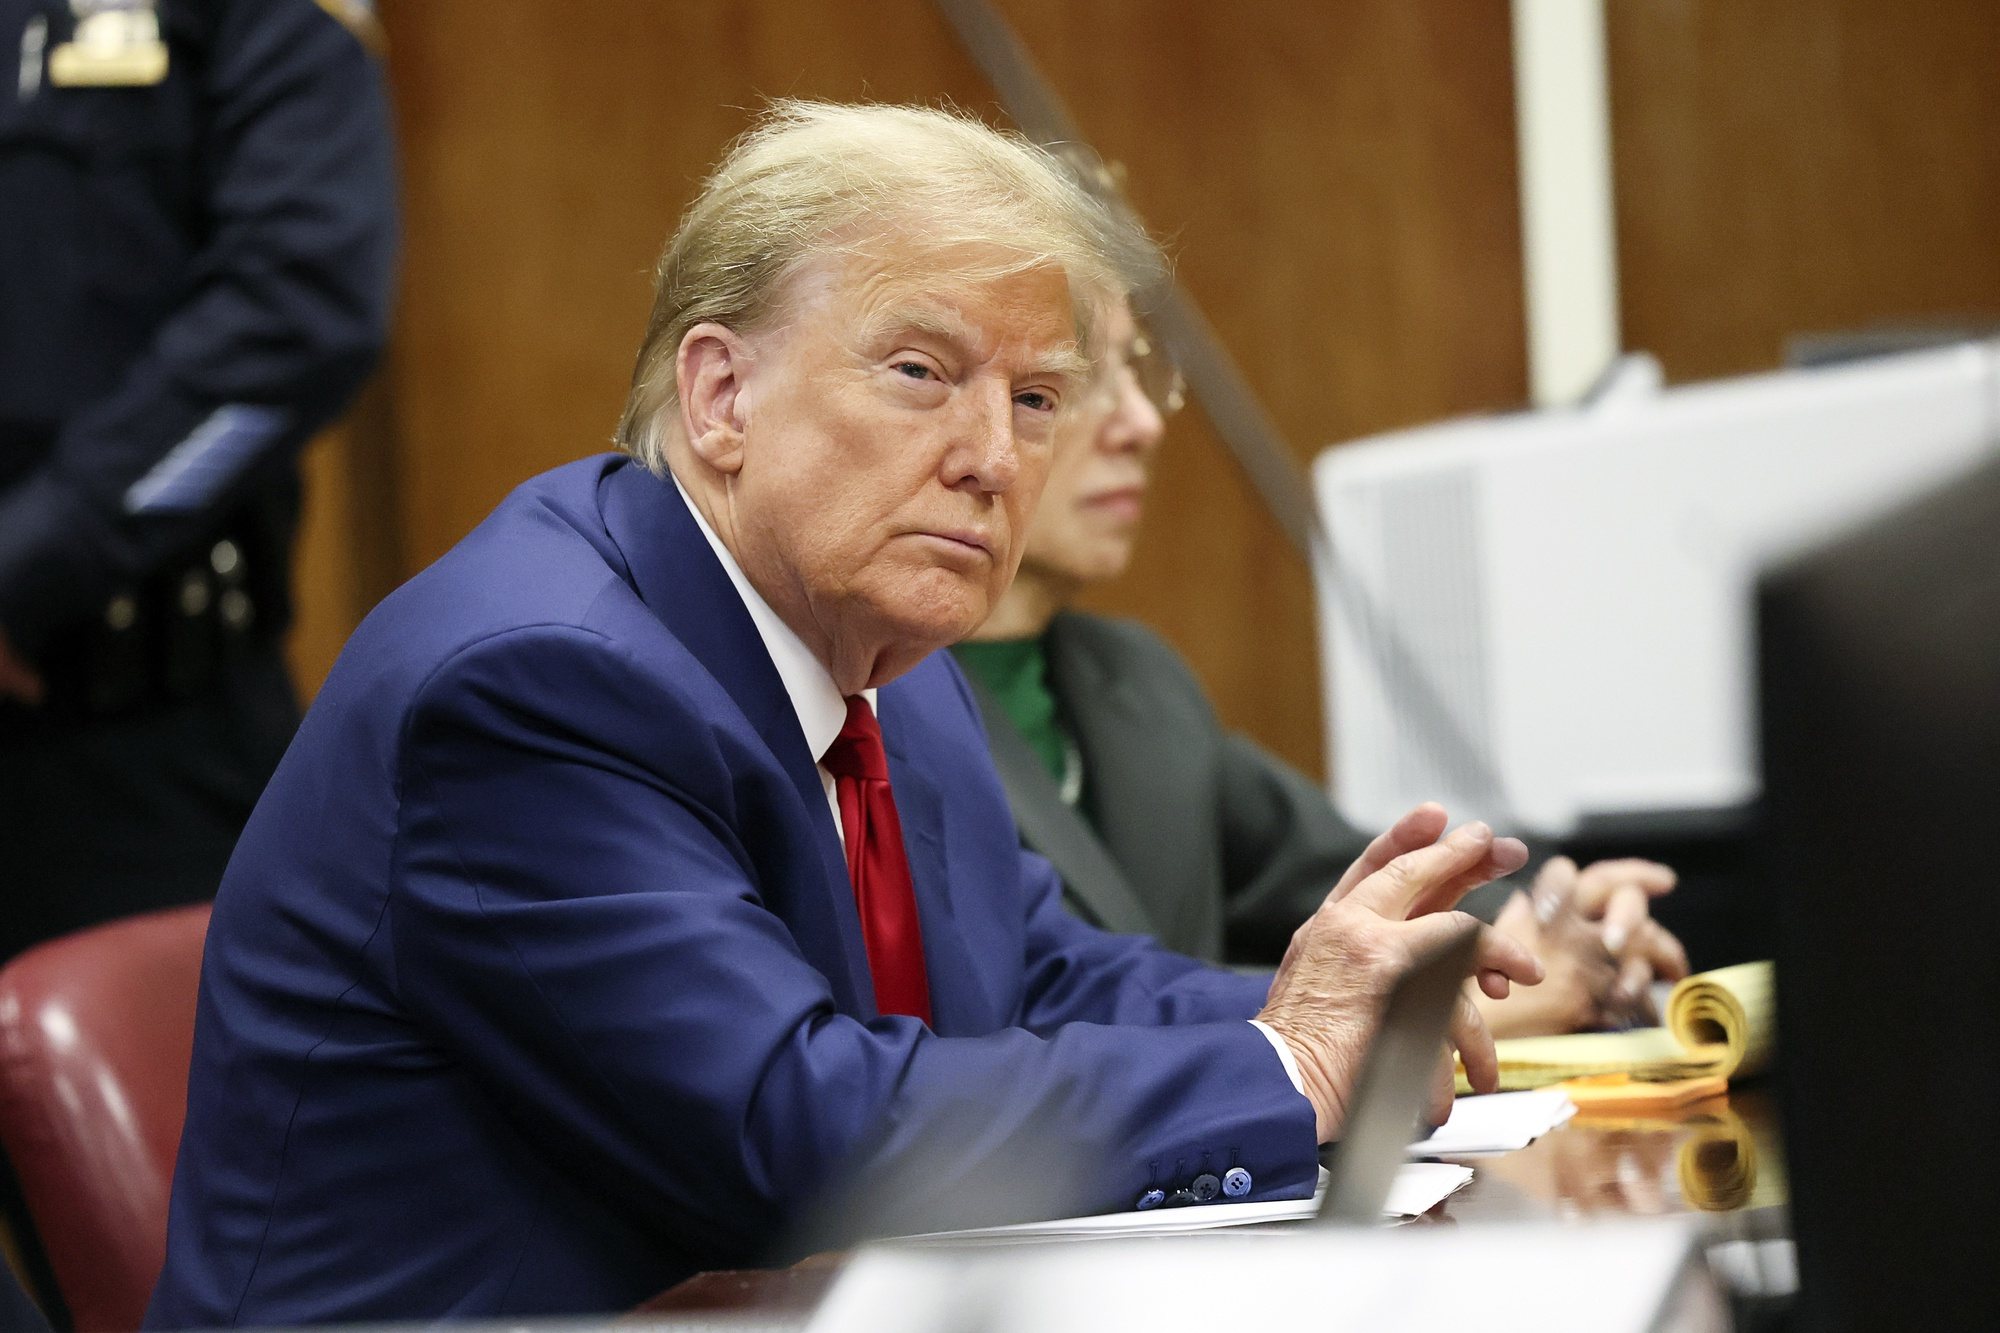 epa11242754 Former U.S. President Donald Trump sits in the courtroom at a hearing in his criminal case on charges stemming from hush money paid to a porn star in New York City, New York, USA, 25 March 2024. Trump is facing 34 felony counts of falsifying business records related to payments made to adult film star Stormy Daniels during his 2016 presidential campaign.  EPA/BRENDAN MCDERMID / POOL